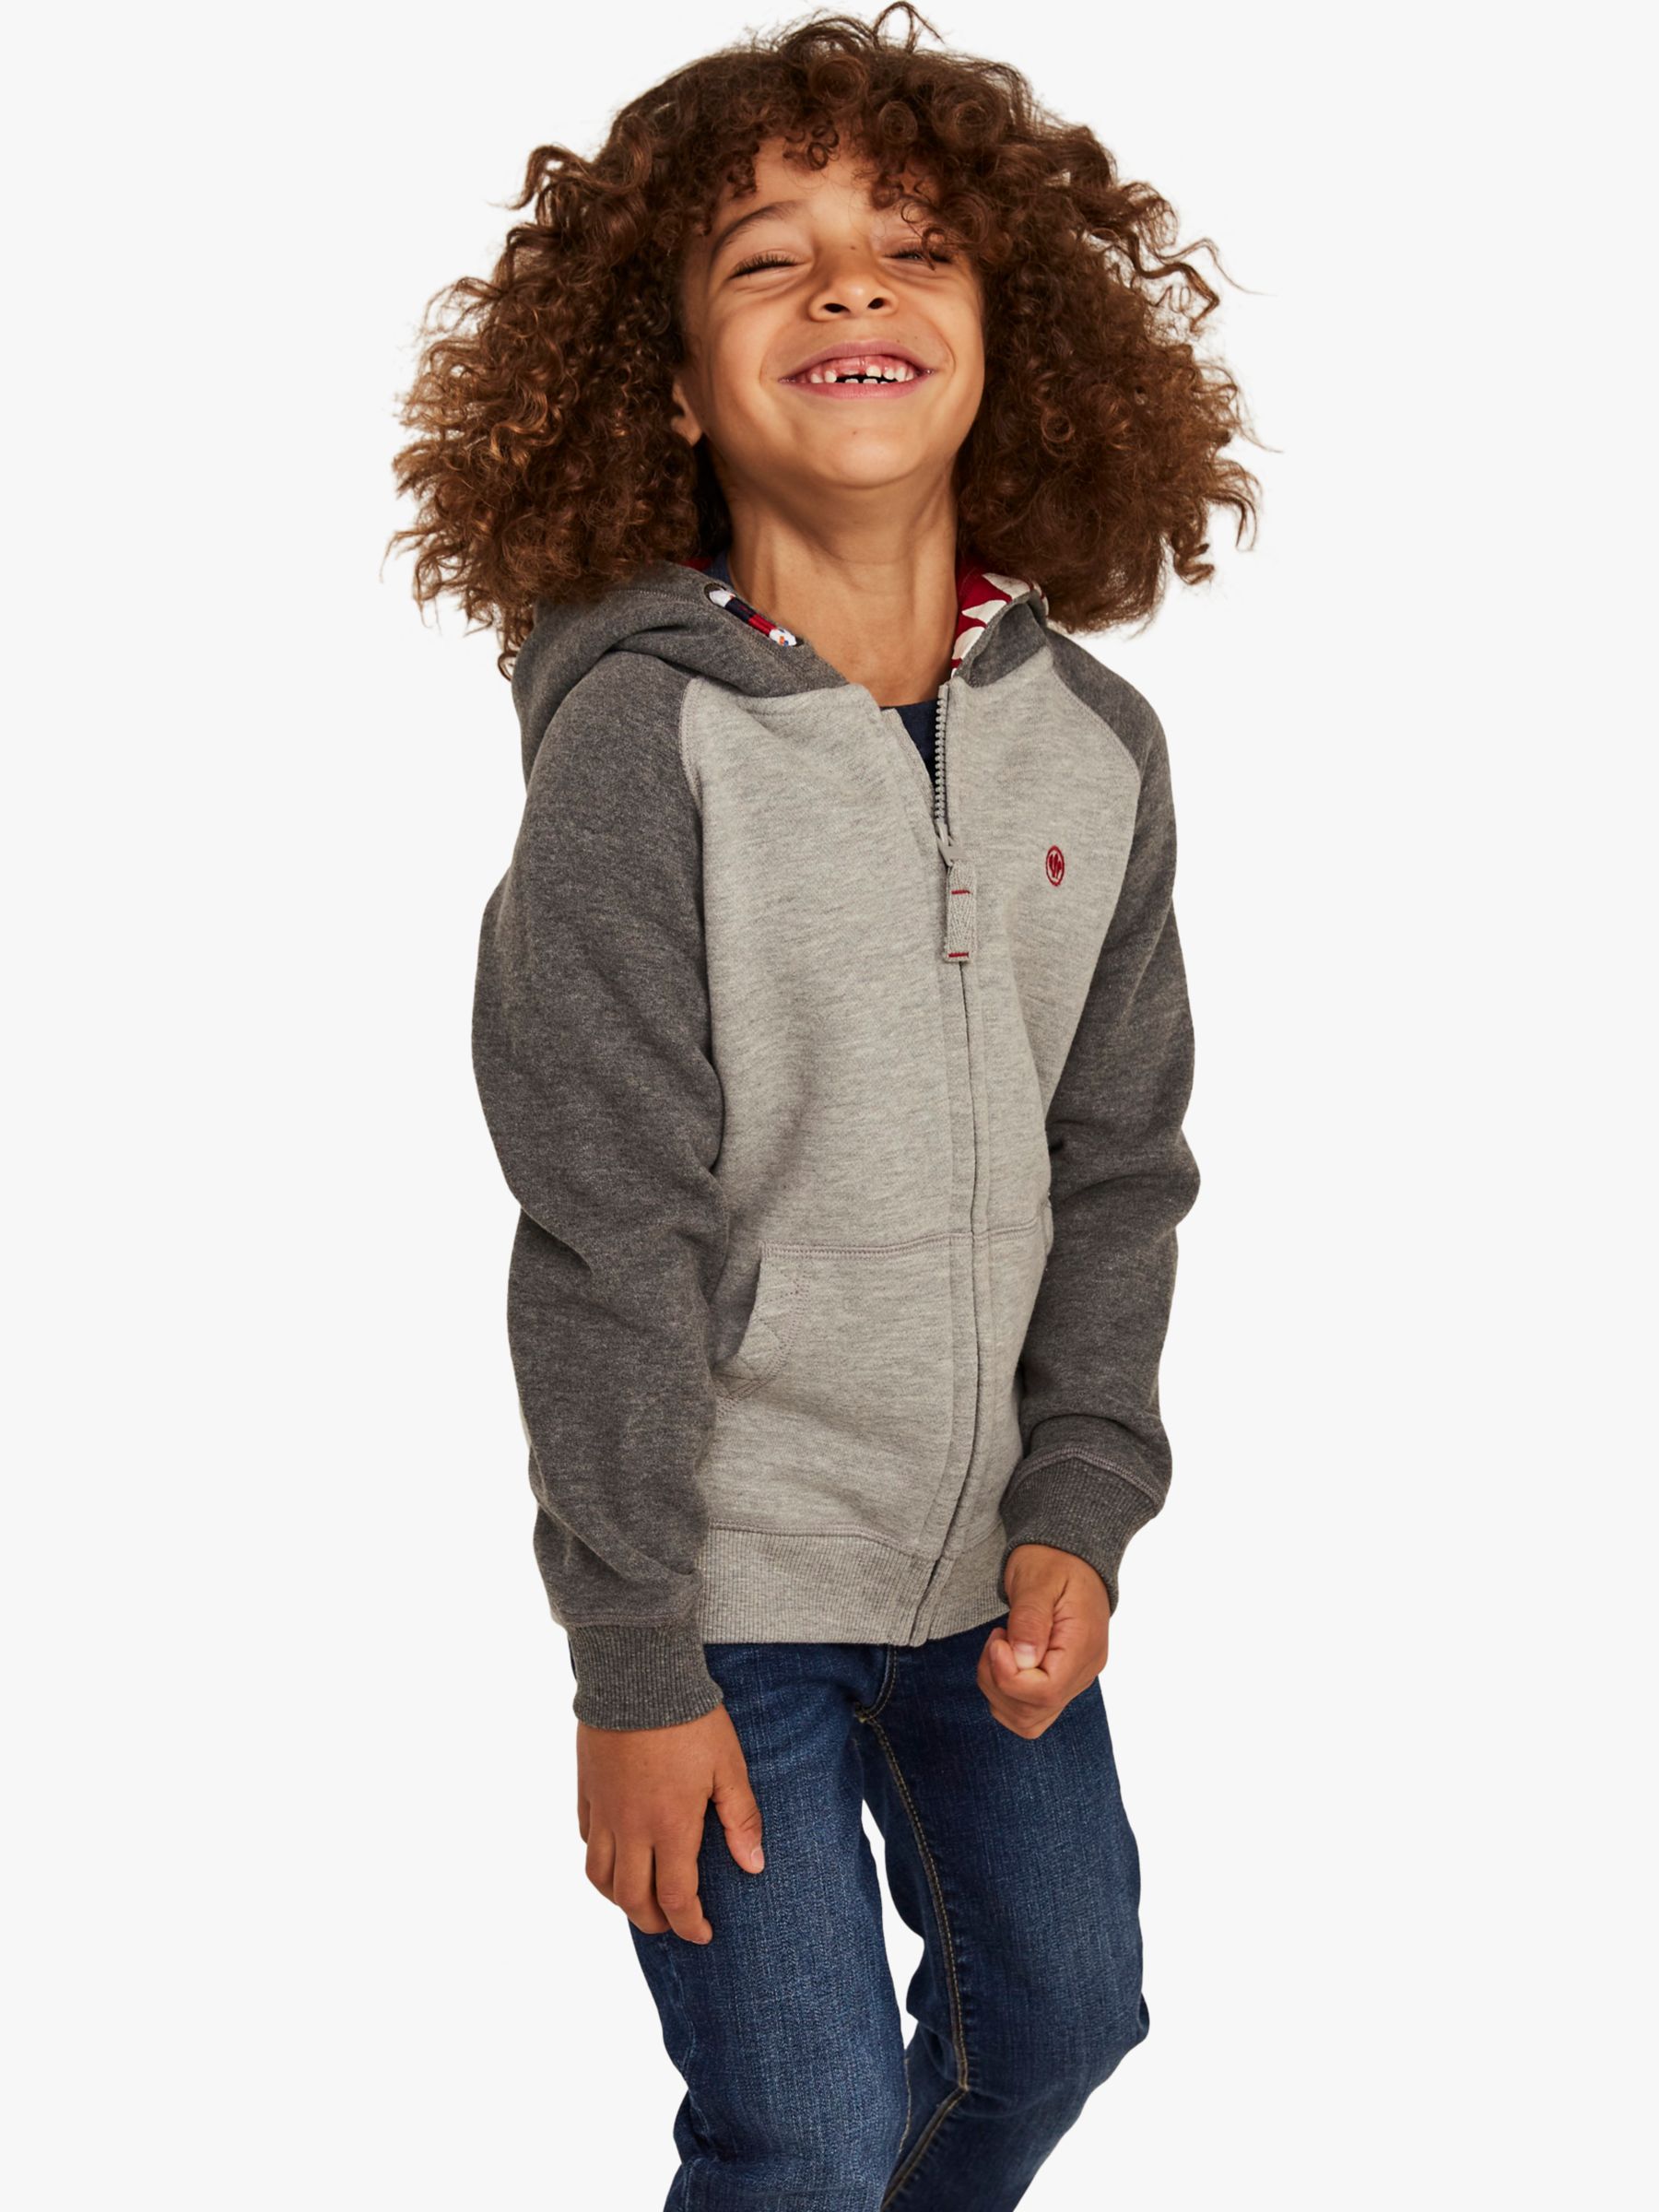 FatFace Kids' Wolf Tooth Hoodie, Charcoal